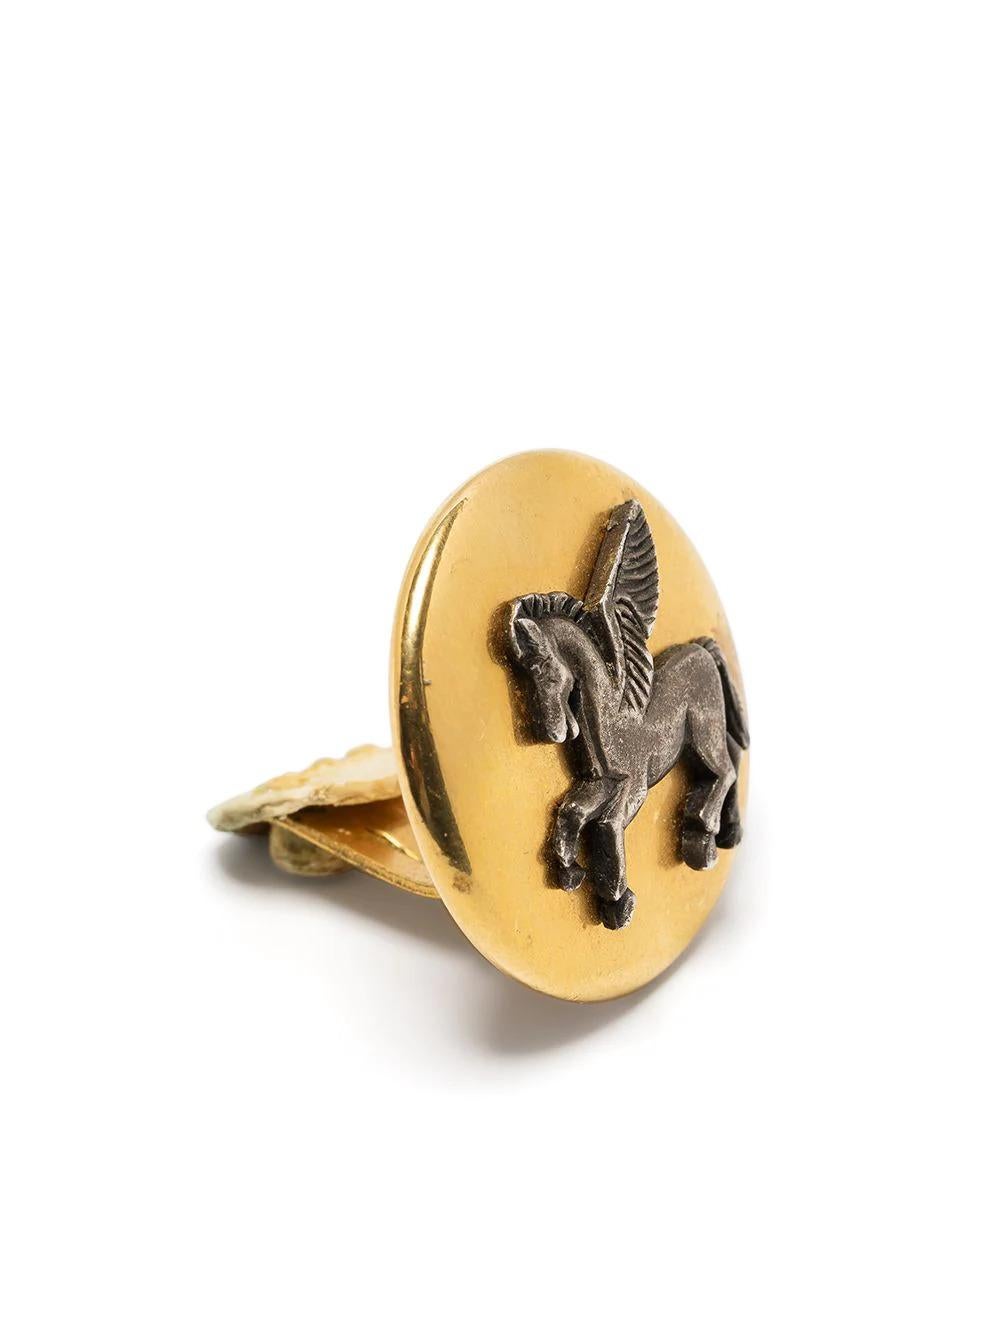 A pair of pre-owned gold-tone earrings from Hermès featuring a horse design and a clip-on back.

Colour: Gold/Black

Composition: Stainless Steel

Measurements: Length 2.5 cm, Width 2.5 cm

Condition: Good vintage condition 7/10.